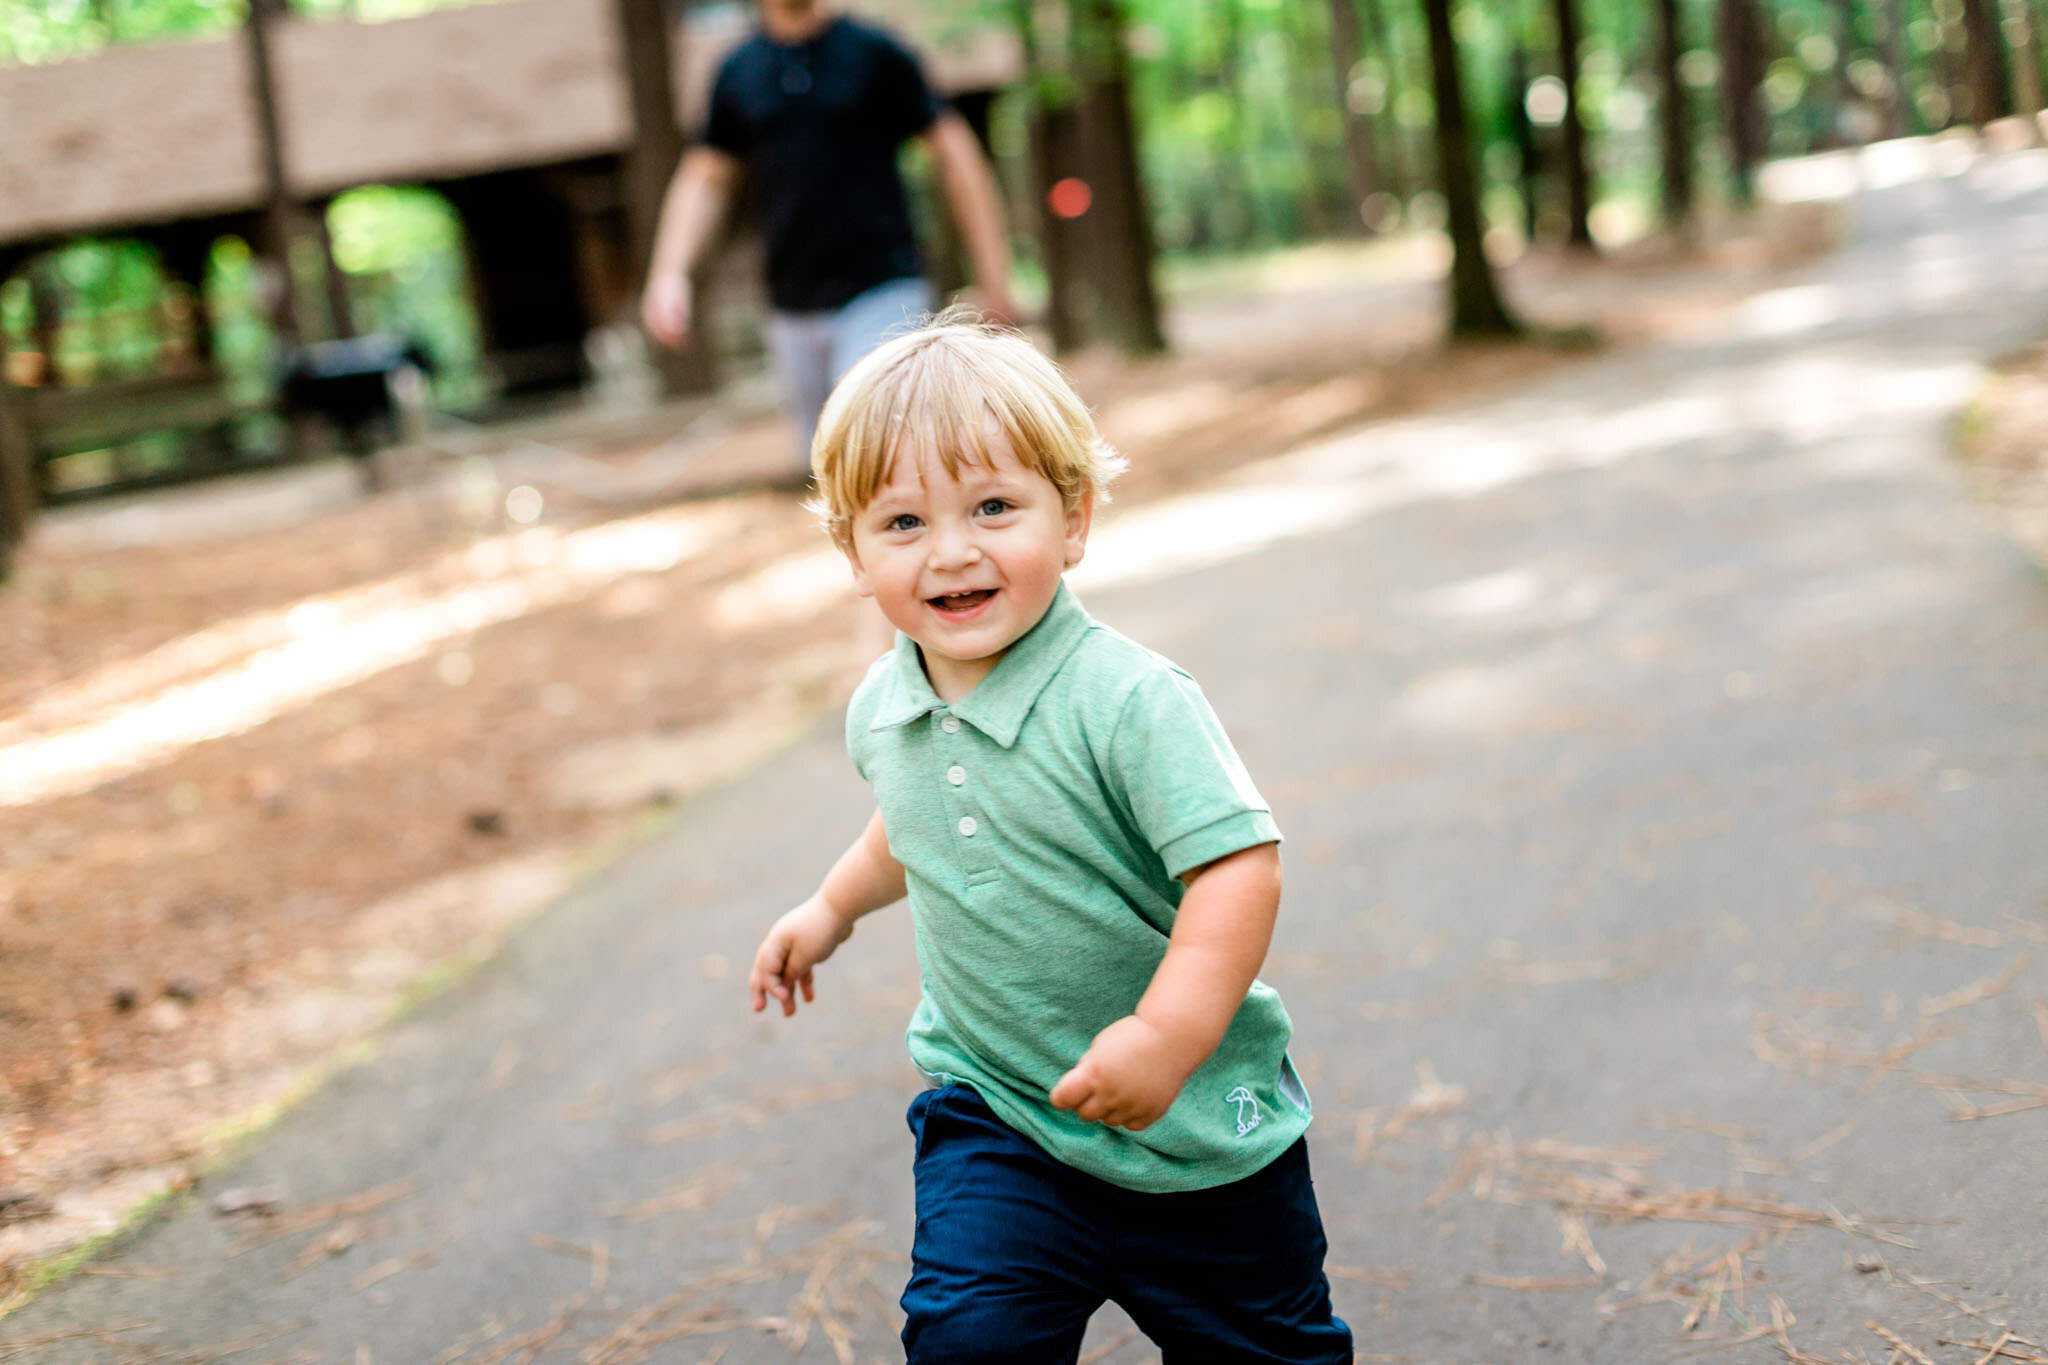 Raleigh Family Photographer | Umstead Park | By G. Lin Photography | Toddler boy running outside